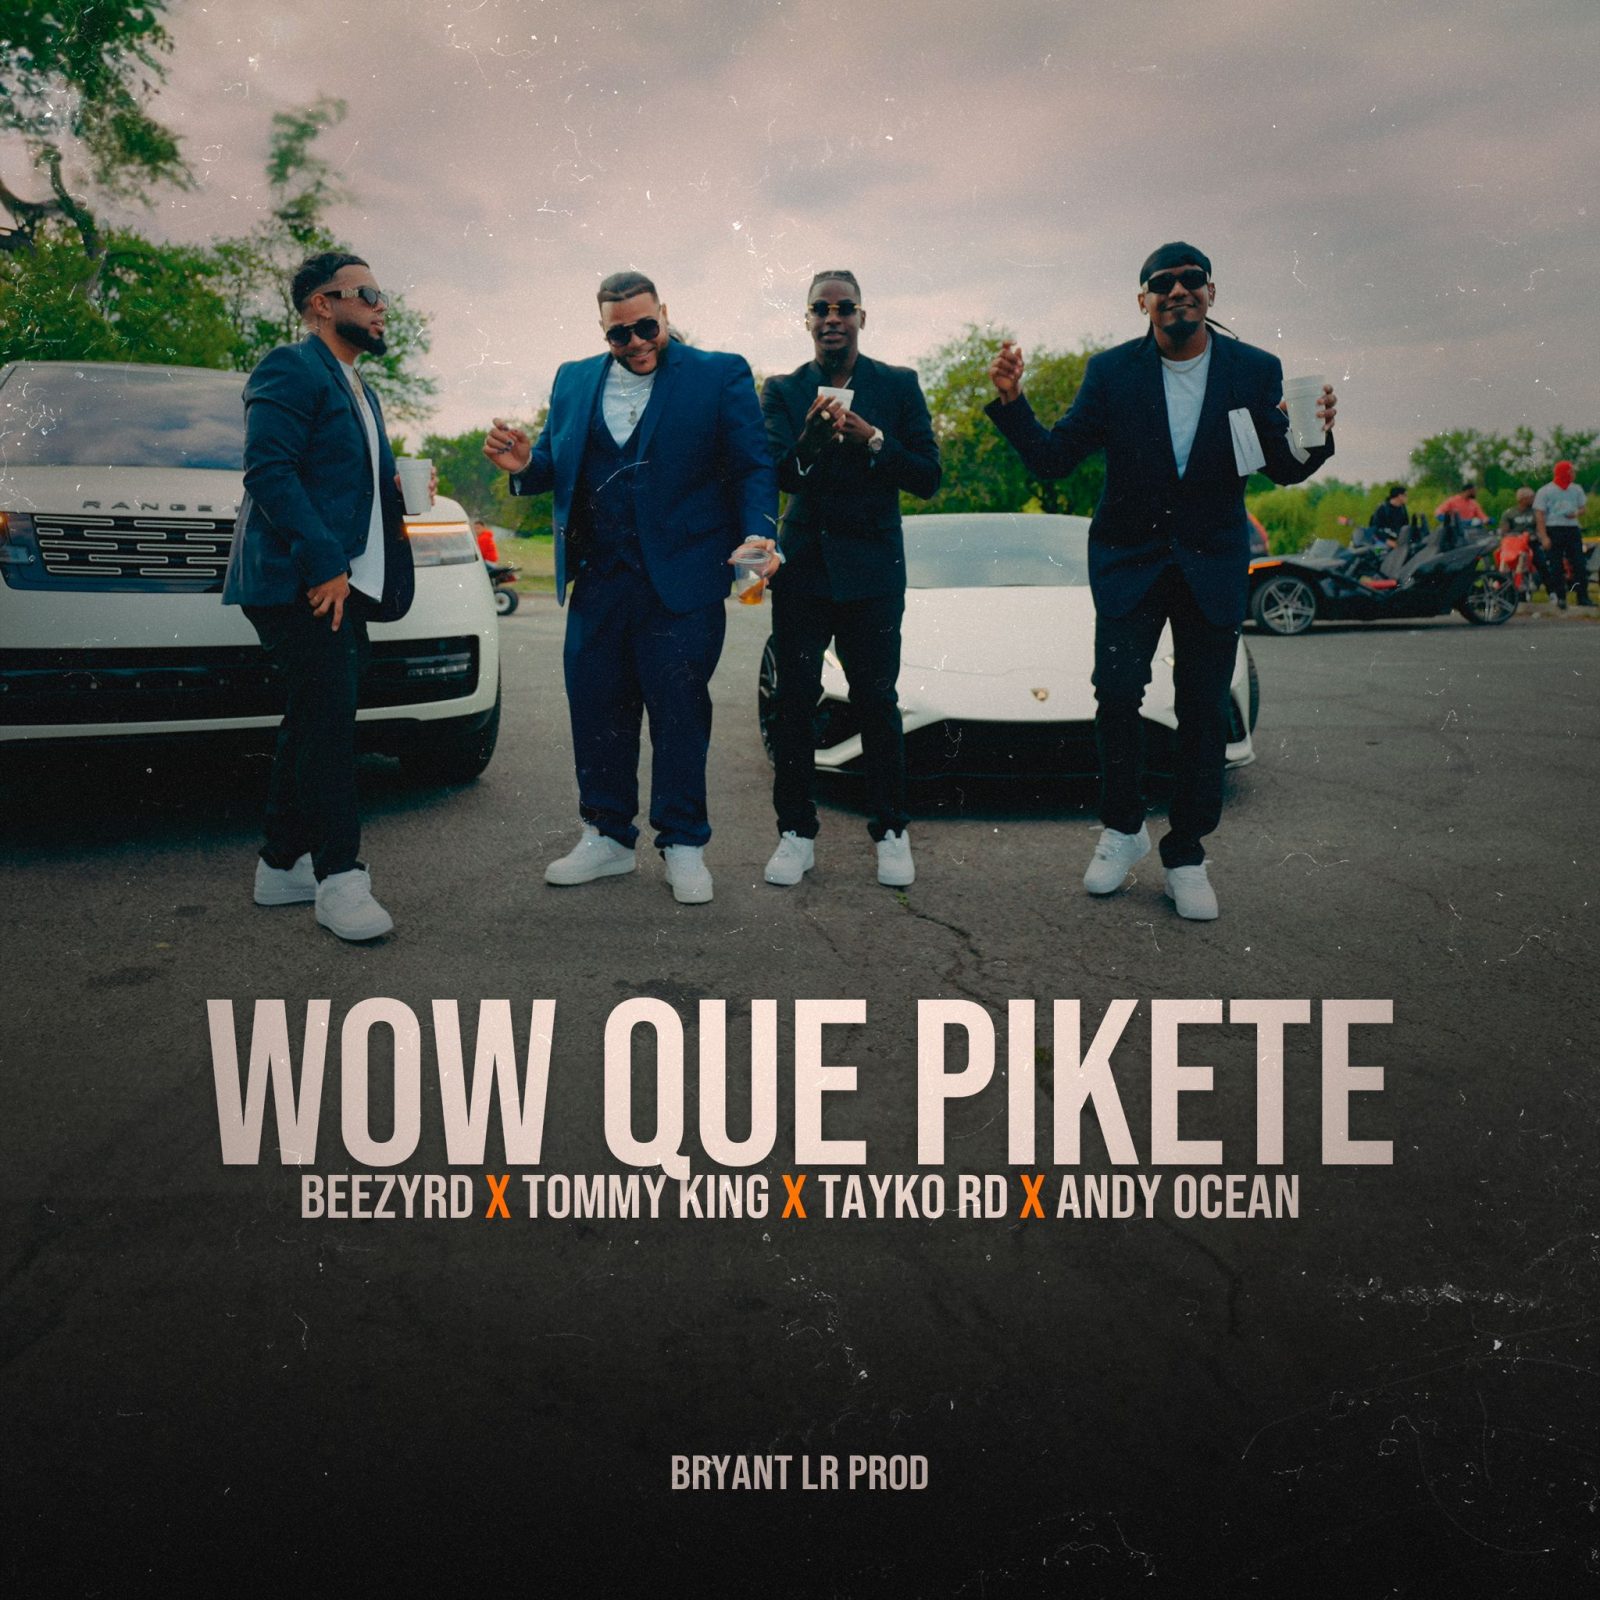 BeezyRD ft Tommy King, TaykoRD & Andy Ocean - Wow Que Pikete (Prod By Bryant LR)